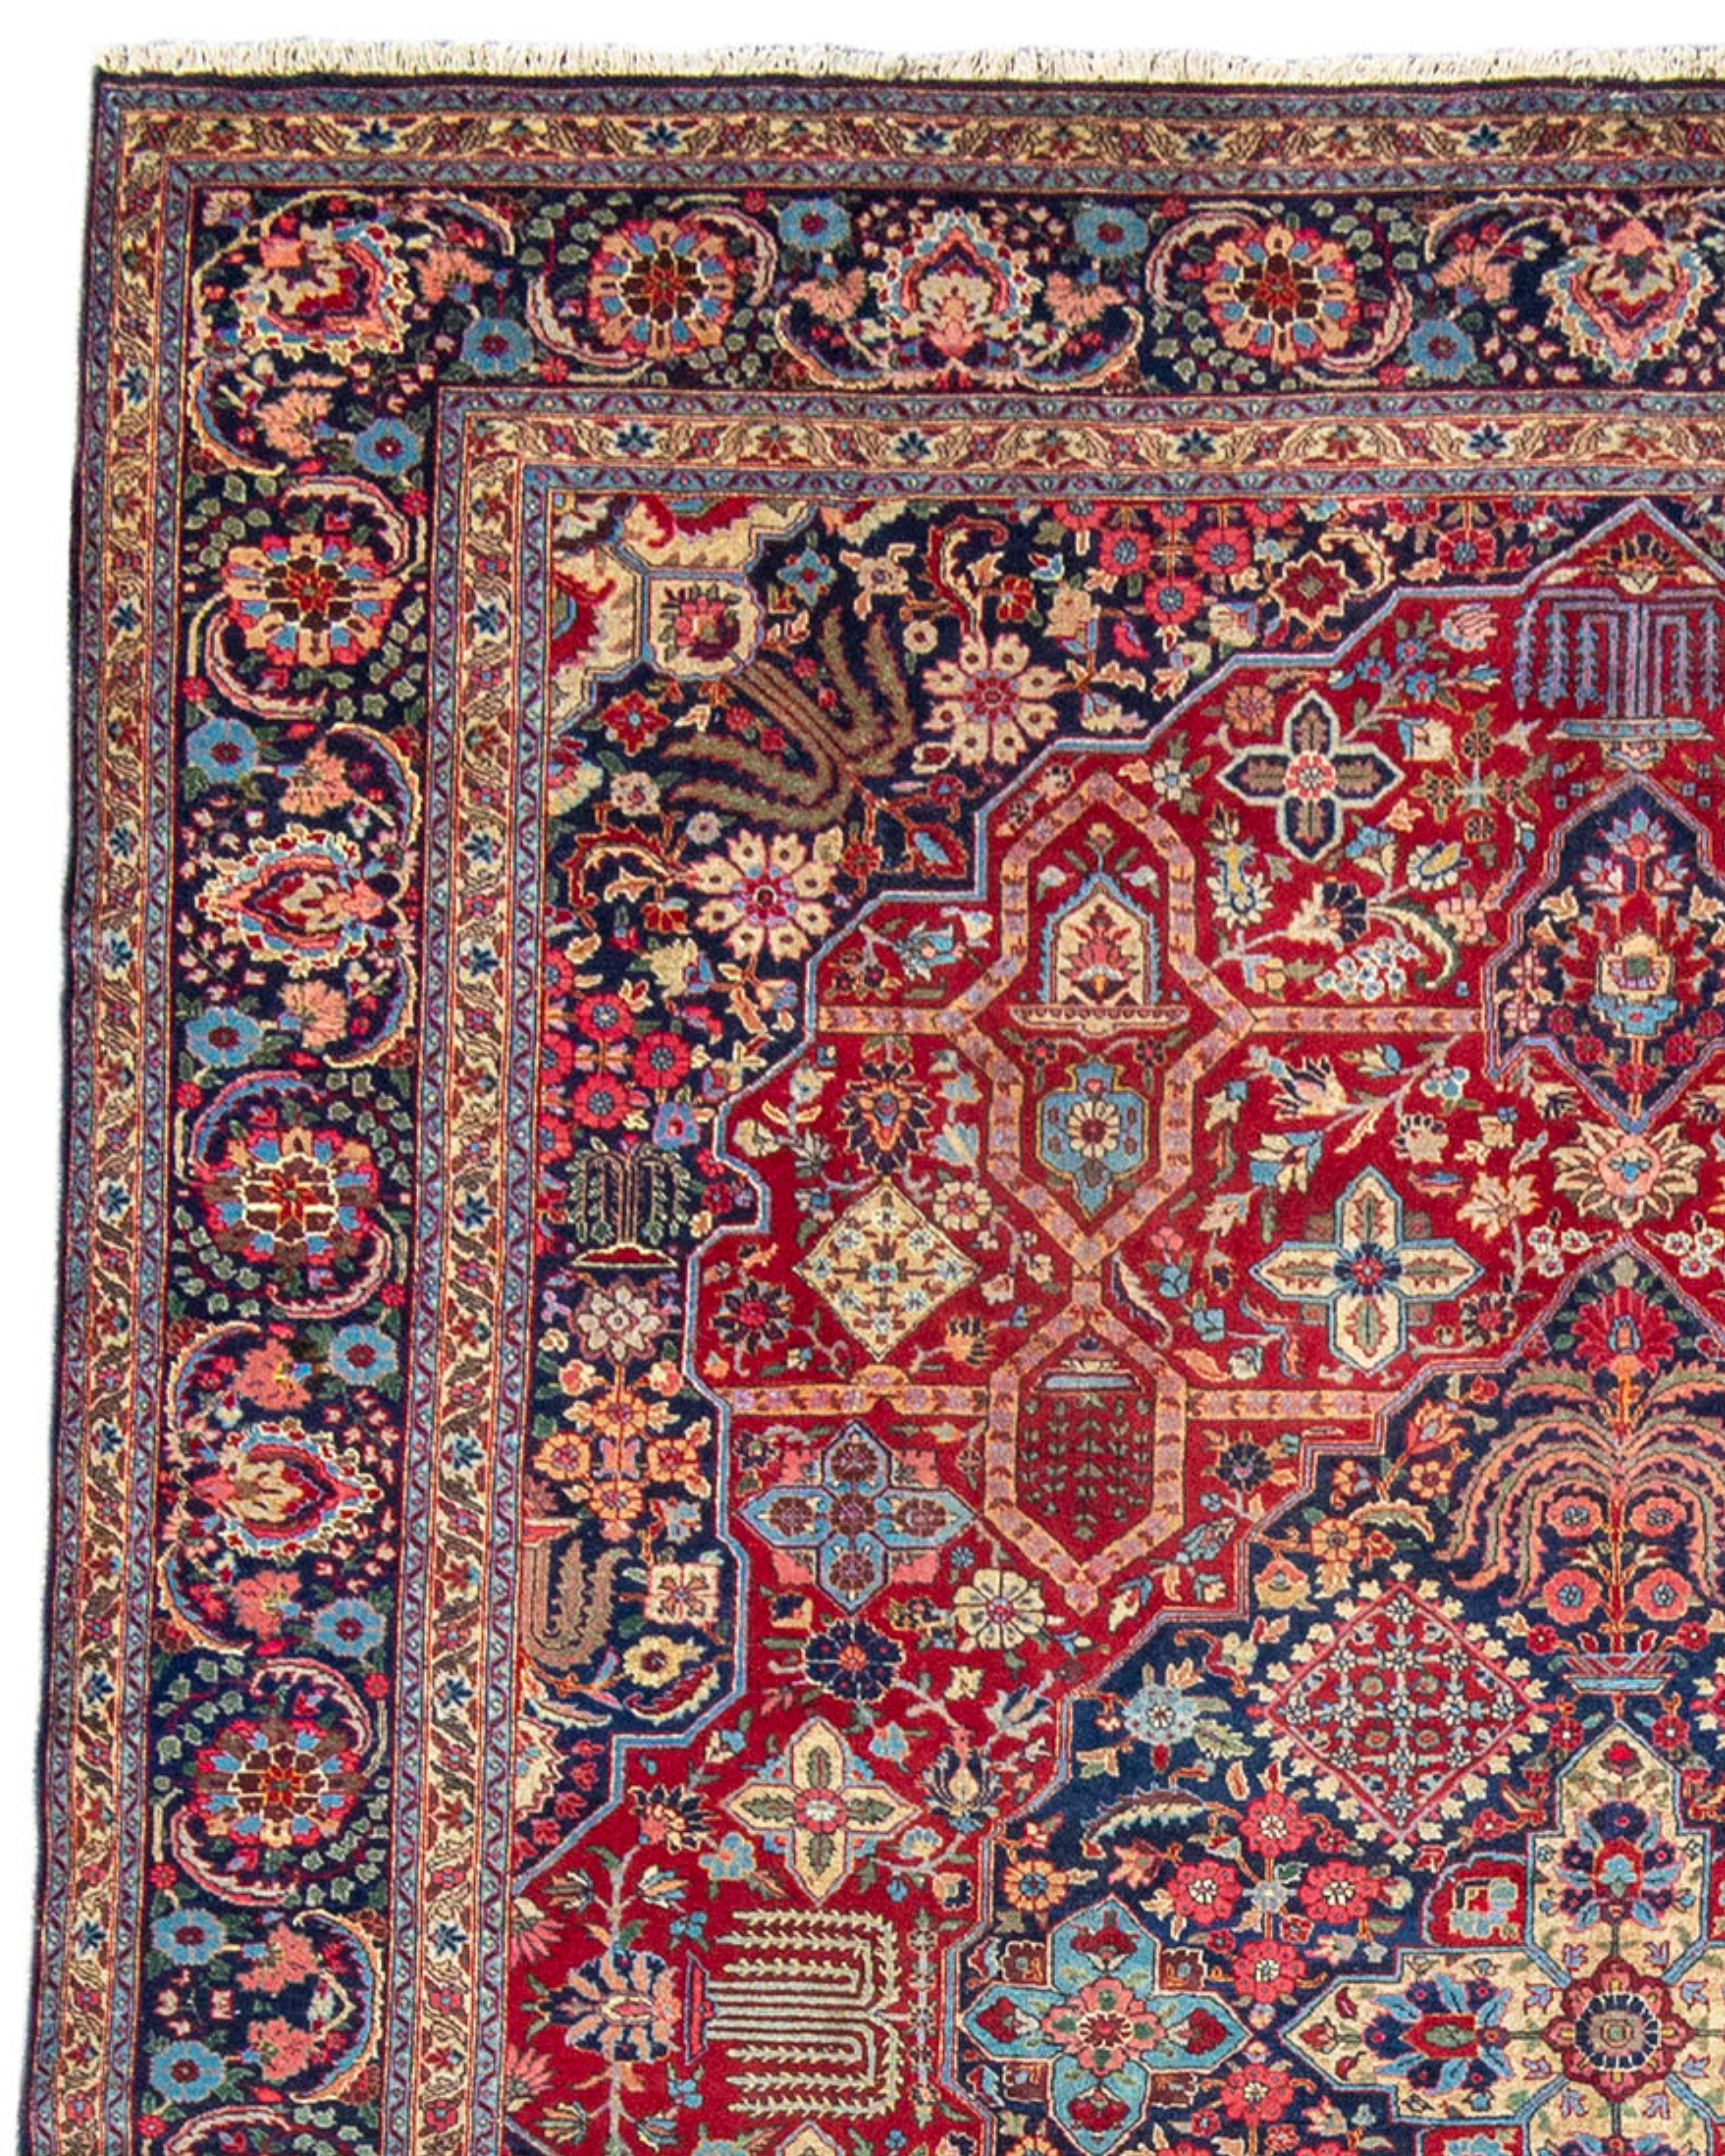 Hand-Knotted Antique Persian Tabriz Rug, c. 1940 For Sale